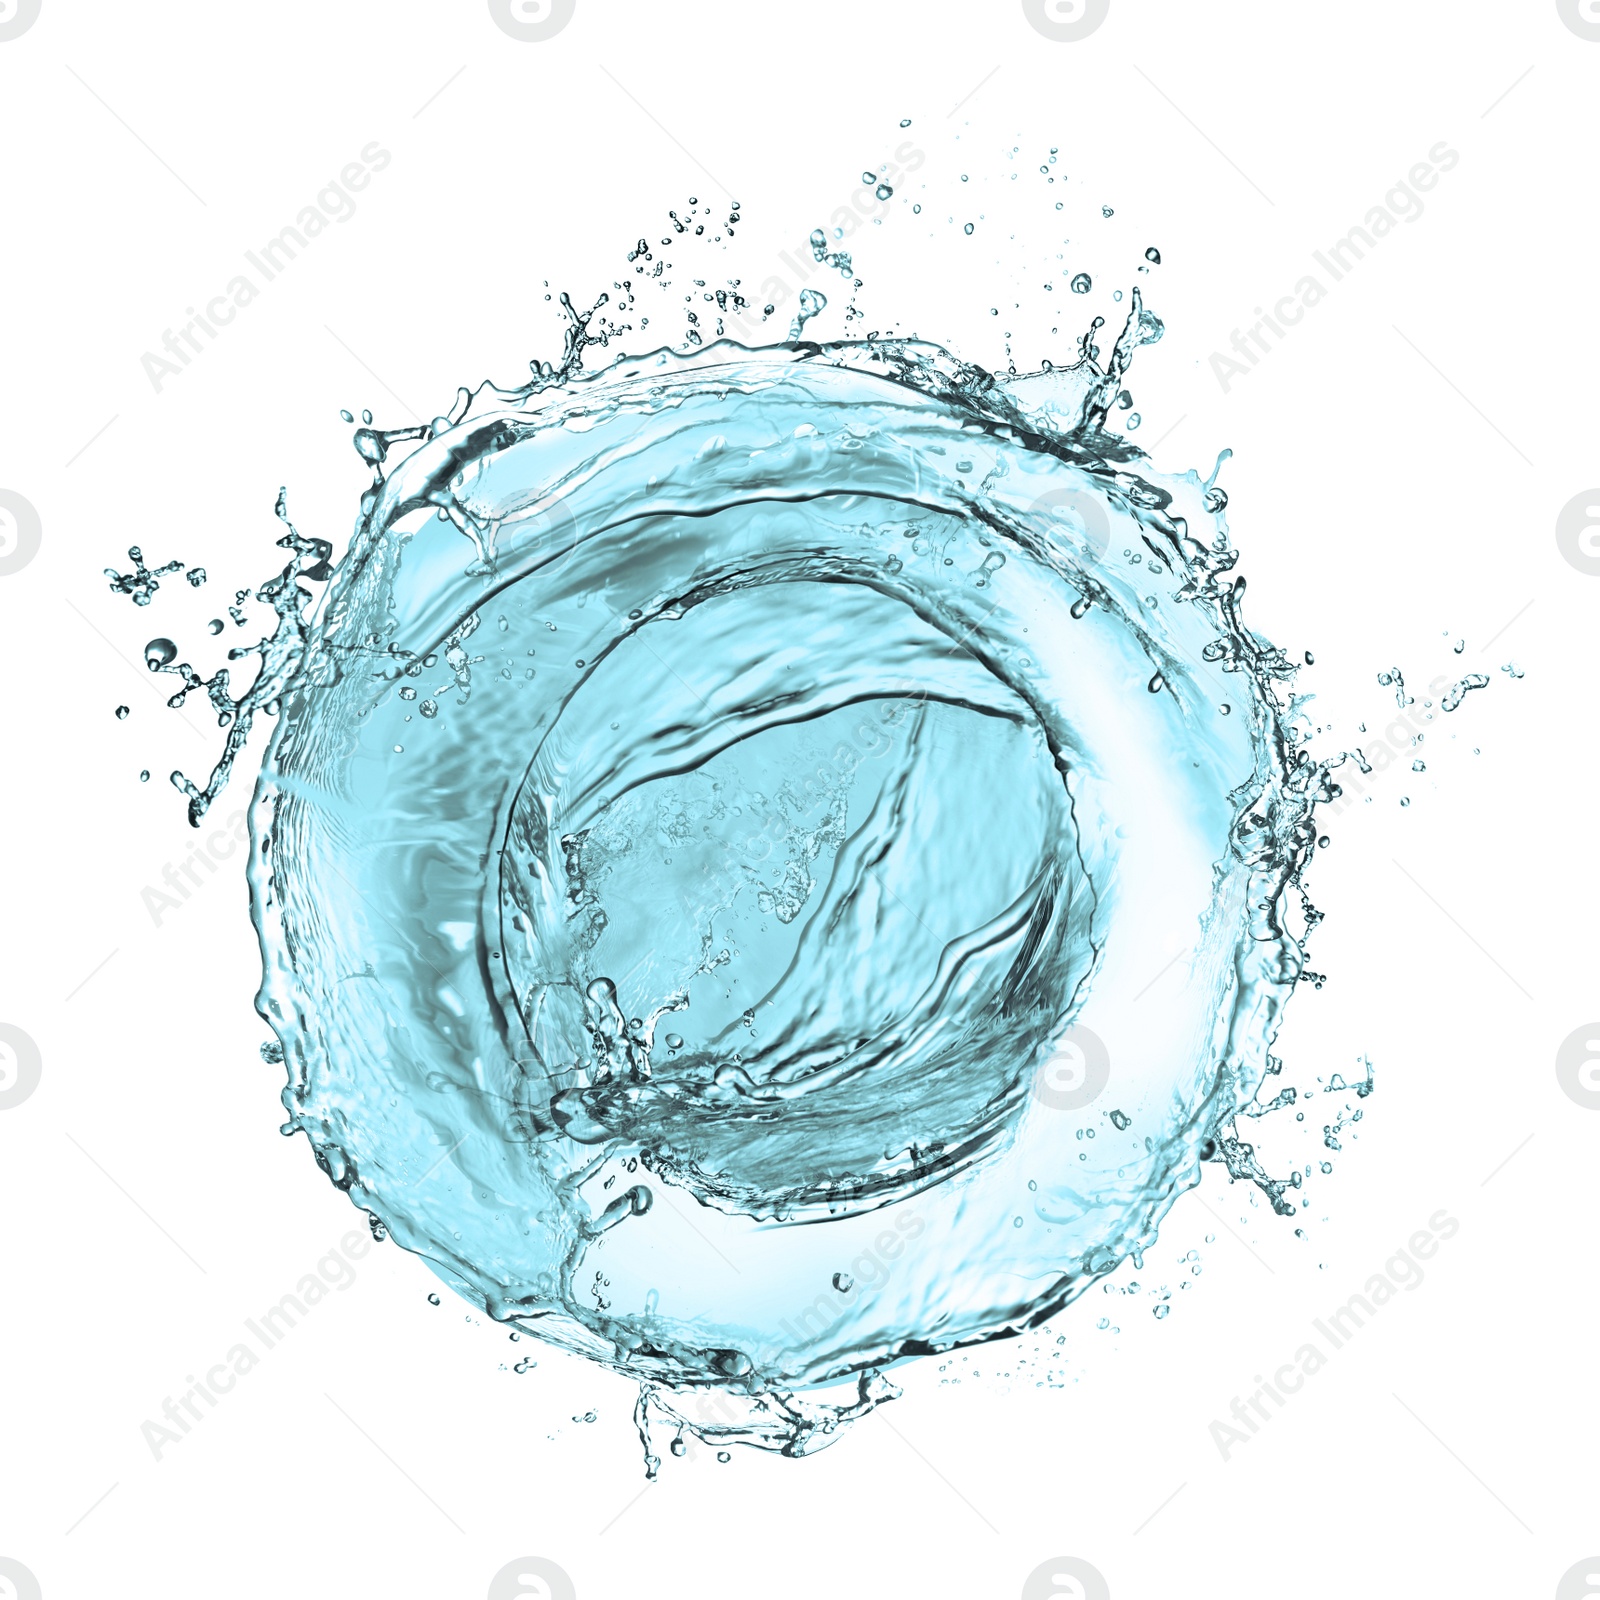 Image of Abstract splash of water isolated on white